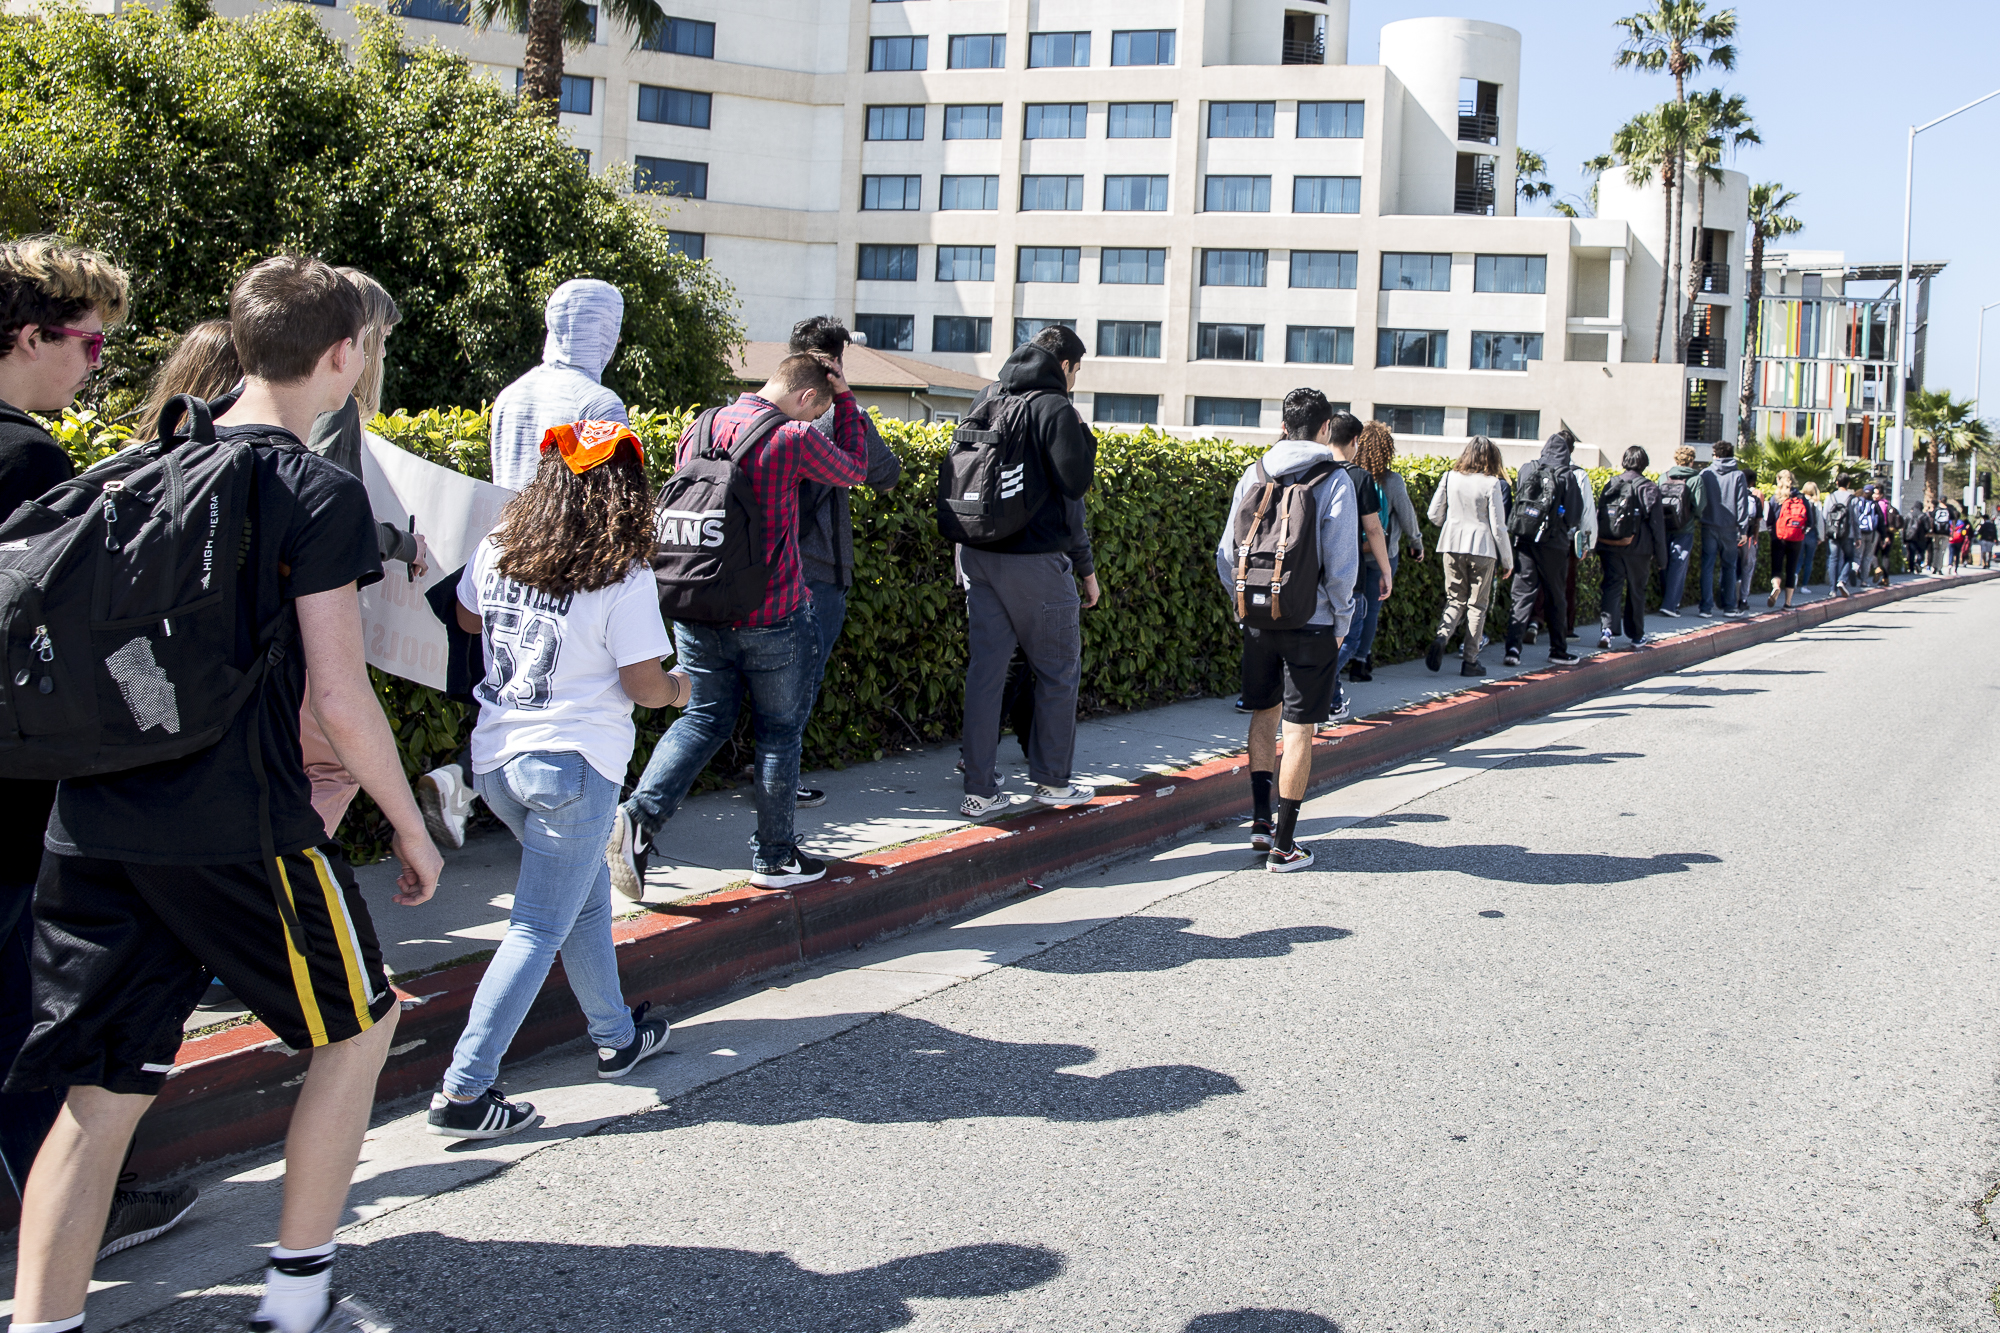  Santa Monica high school students walk down 4th street towards Santa Monica City Hall during the national student walkout that took place in Santa Monica, California on Friday, April 20 2018. Several hundred students from area high schools and middl